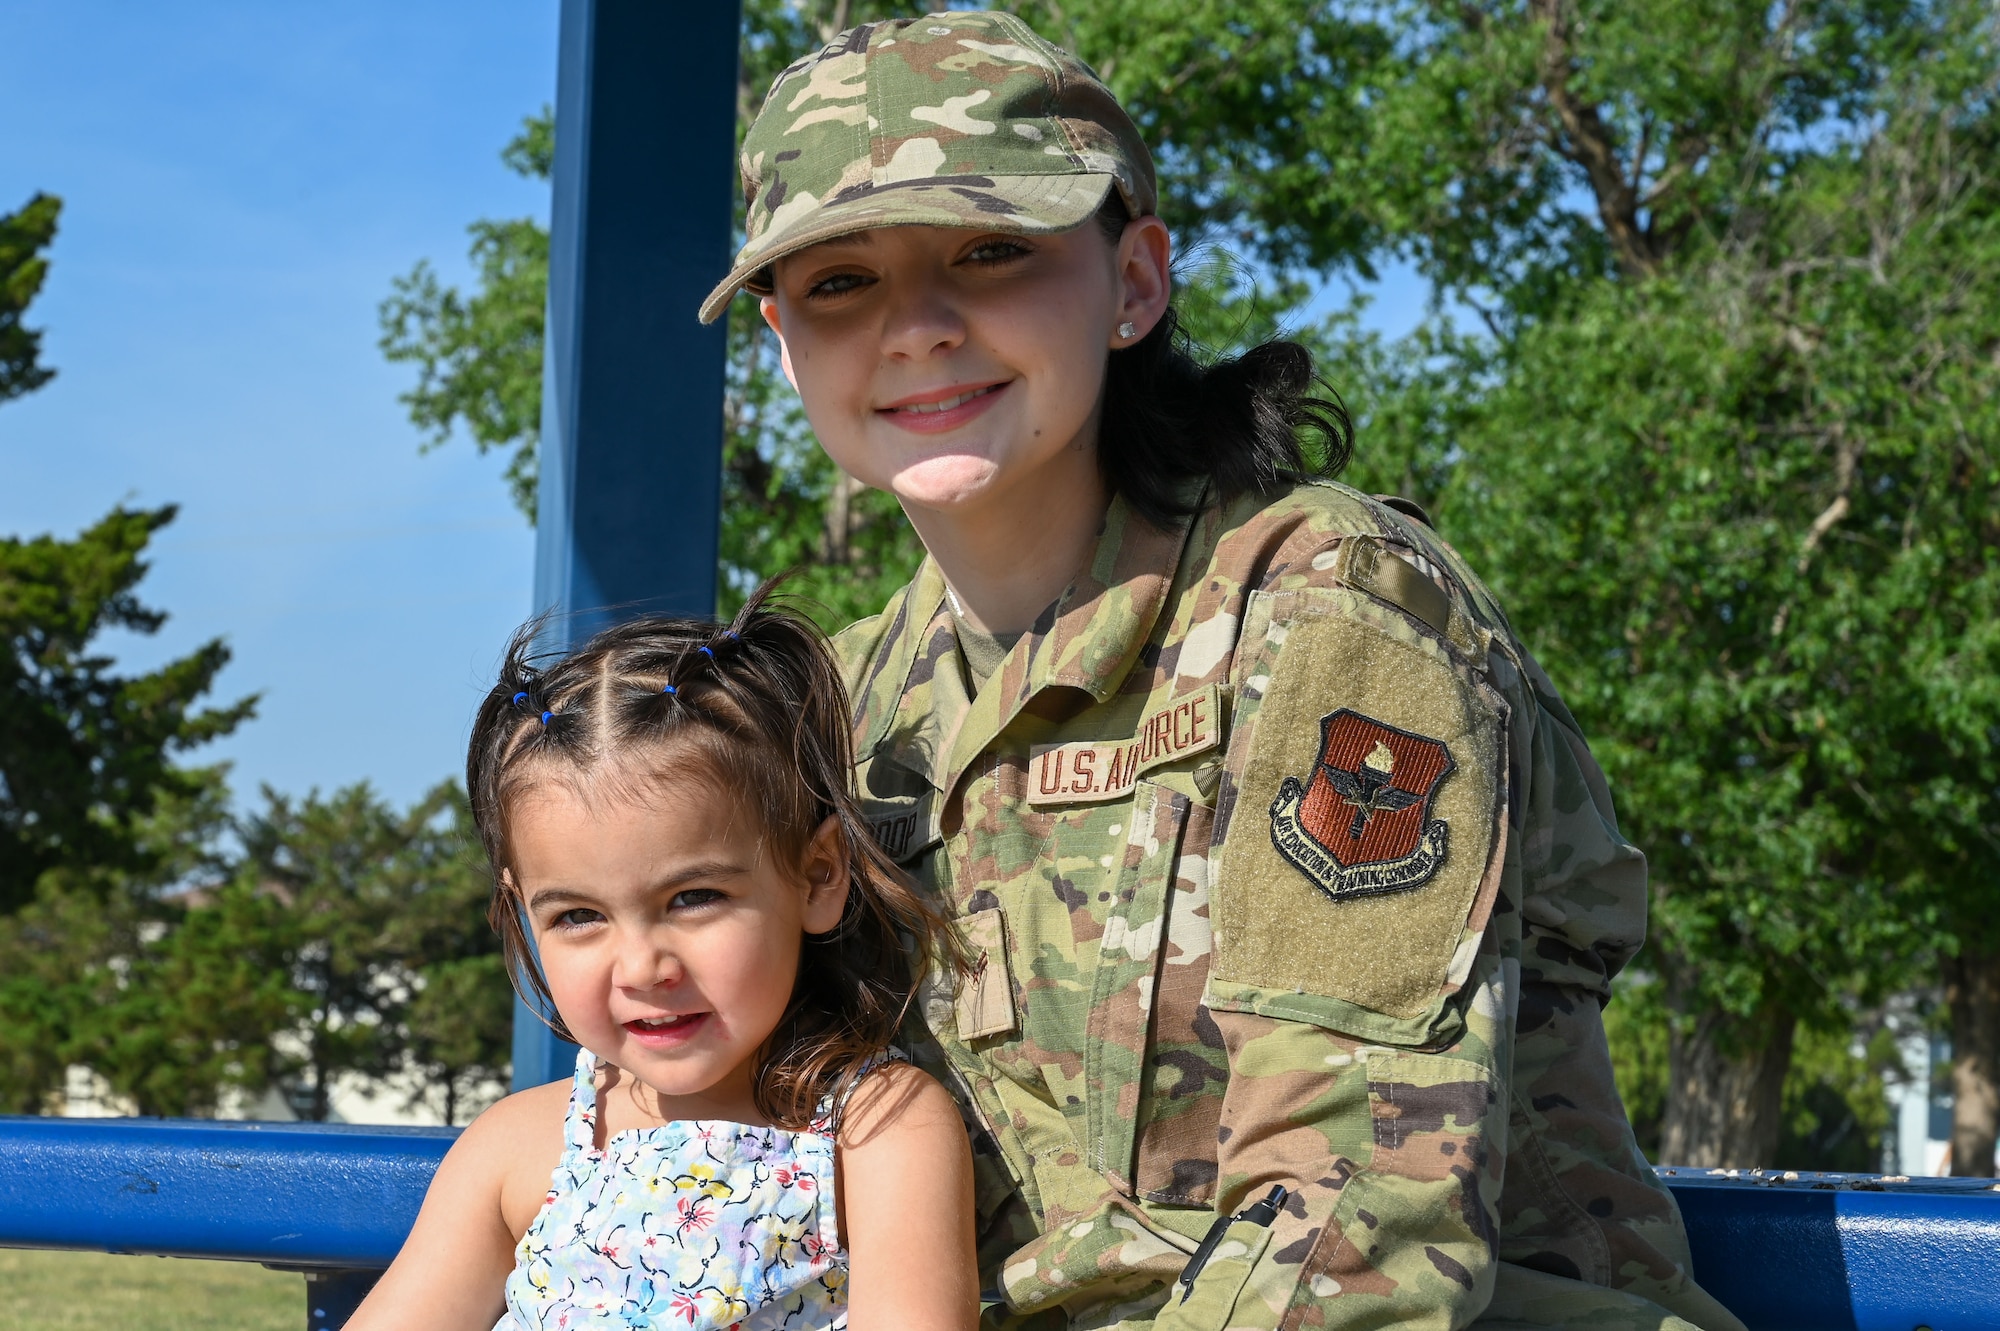 U.S. Air Force Airman 1st Class Jaiden Roop, 97th Logistics Readiness Squadron material management airman, poses for a photo with her daughter, Emberly, at Altus Air Force Base, Oklahoma, May 9, 2023. There are 240,643 children among all active duty Air Force service members. (U.S. Air Force photo by Senior Airman Kayla Christenson)